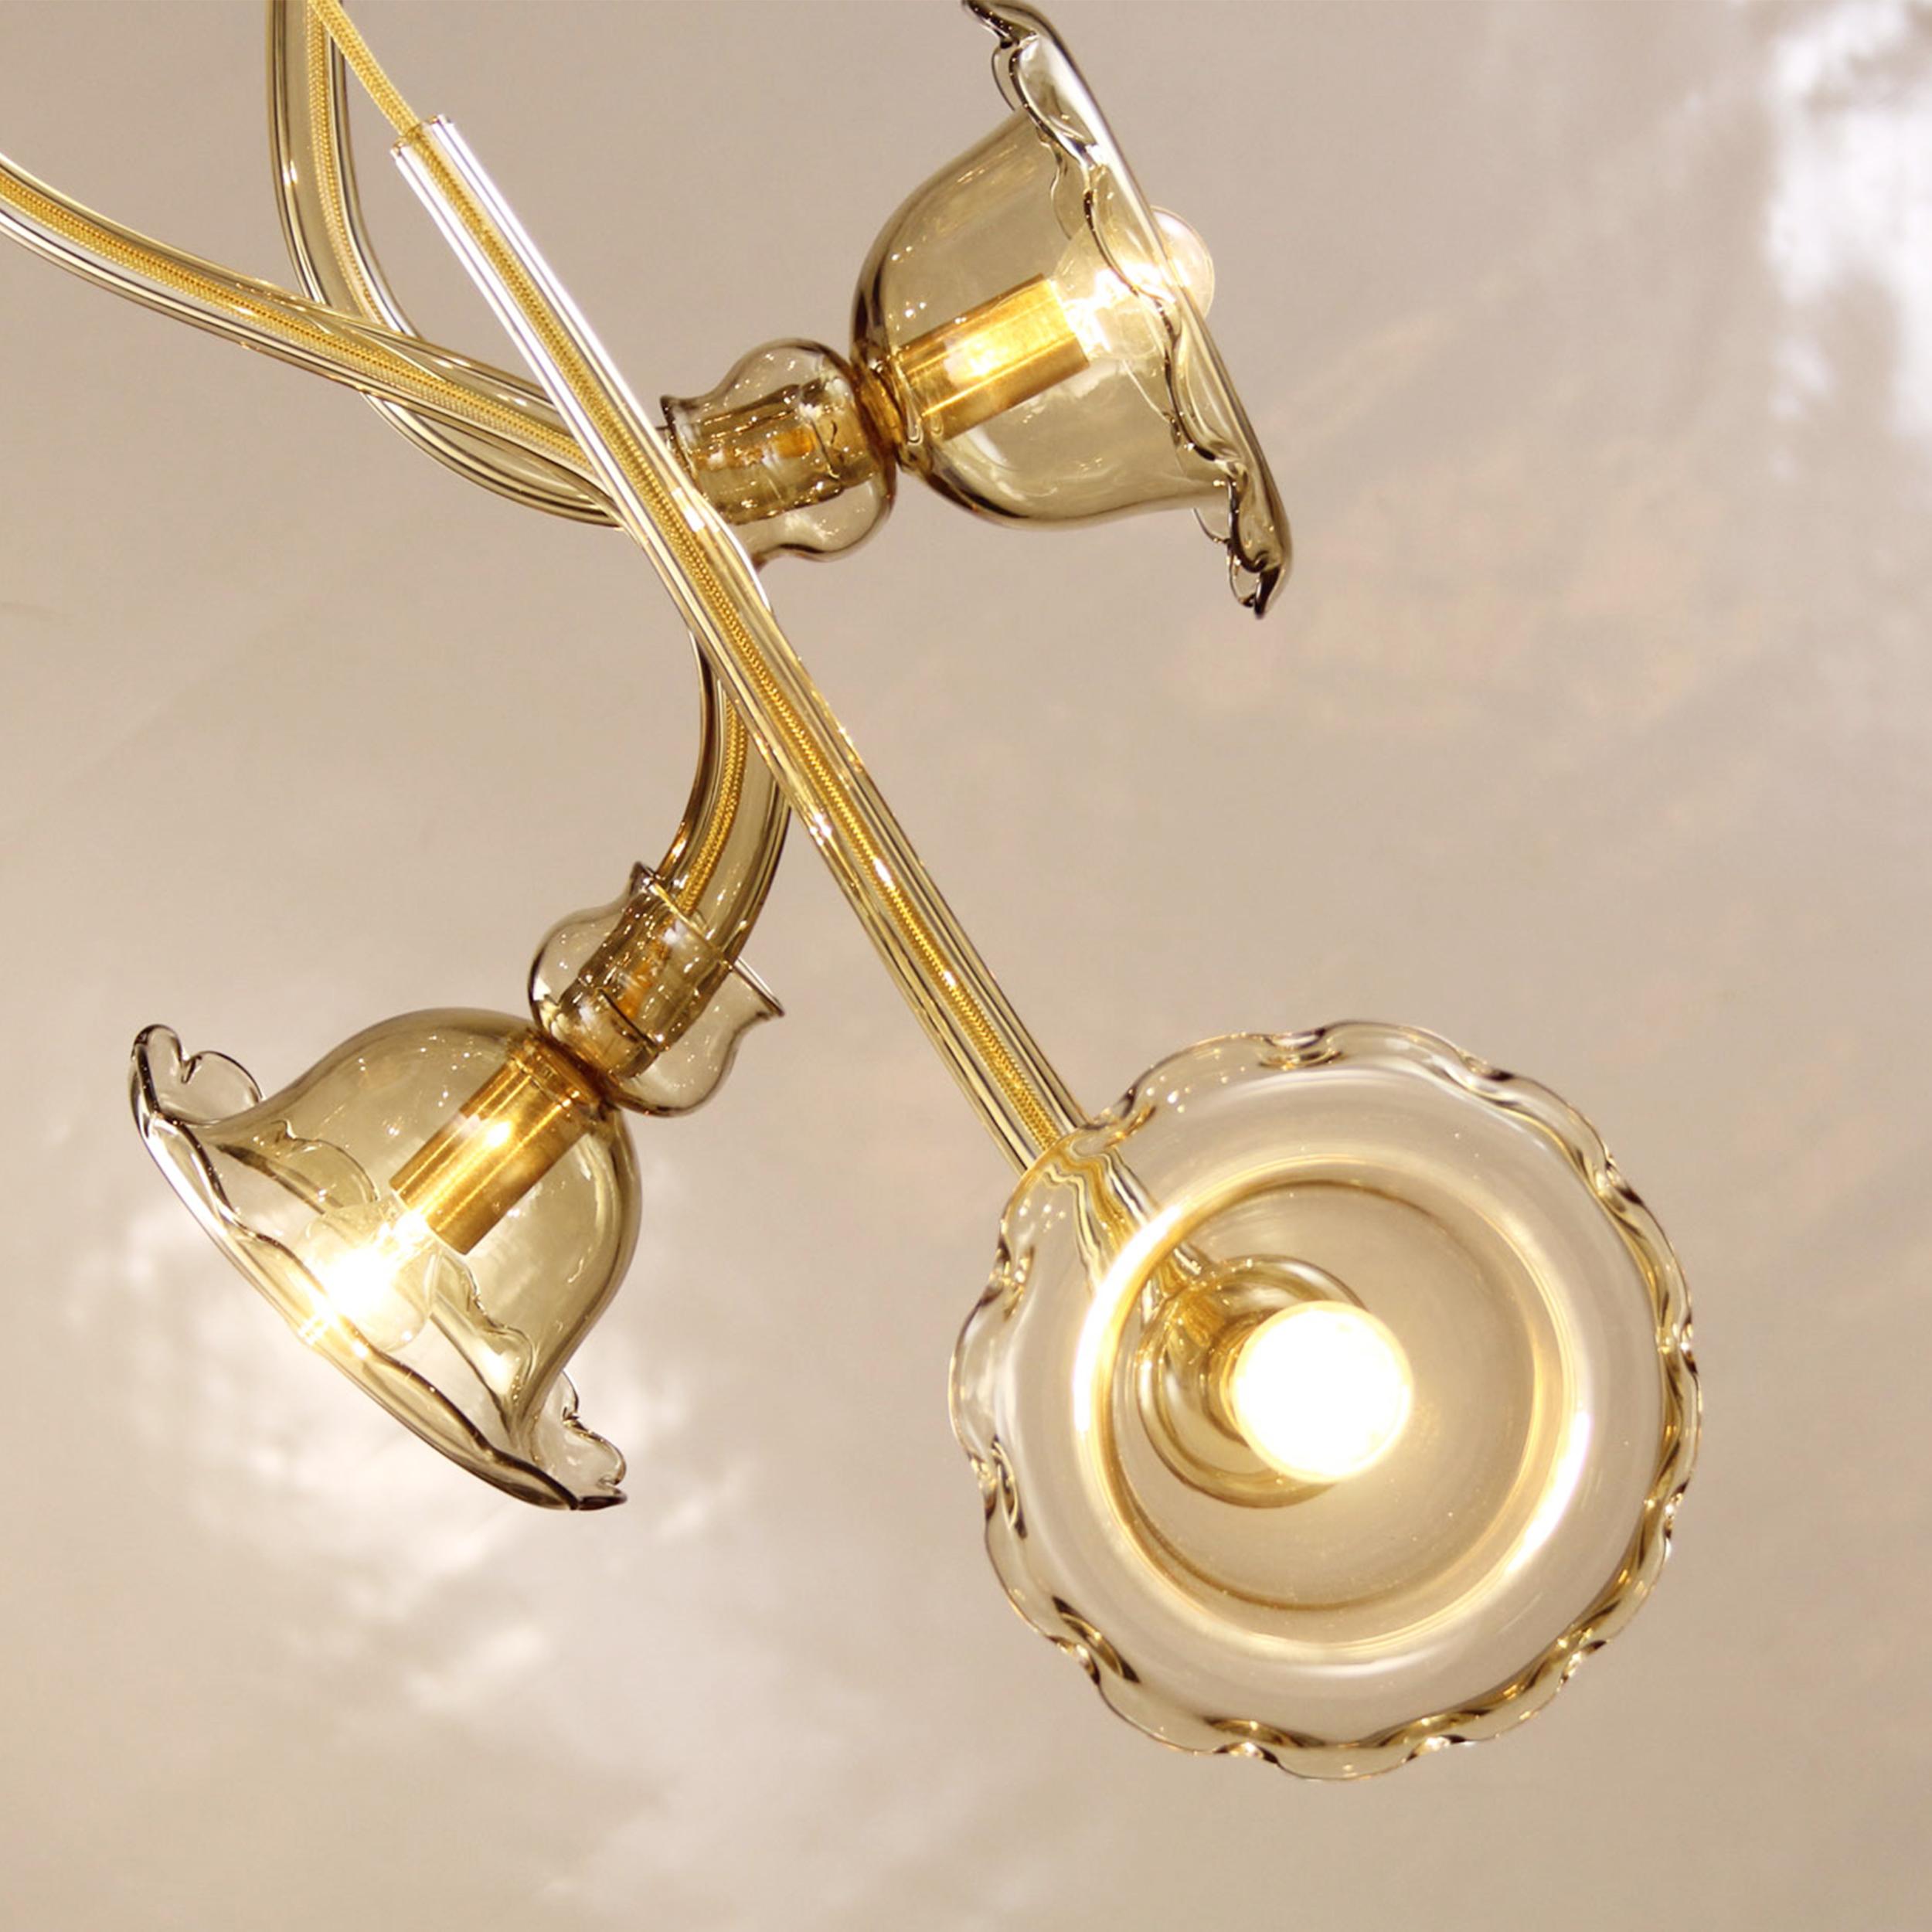 Ikebana design Romano Saccani Architetti Associati is a collection of “classic” inspiration made up of single pendants grouped in ever-changing scenographic settings. Drawing from the sumptuous and varied decorative sample of the classic chandelier